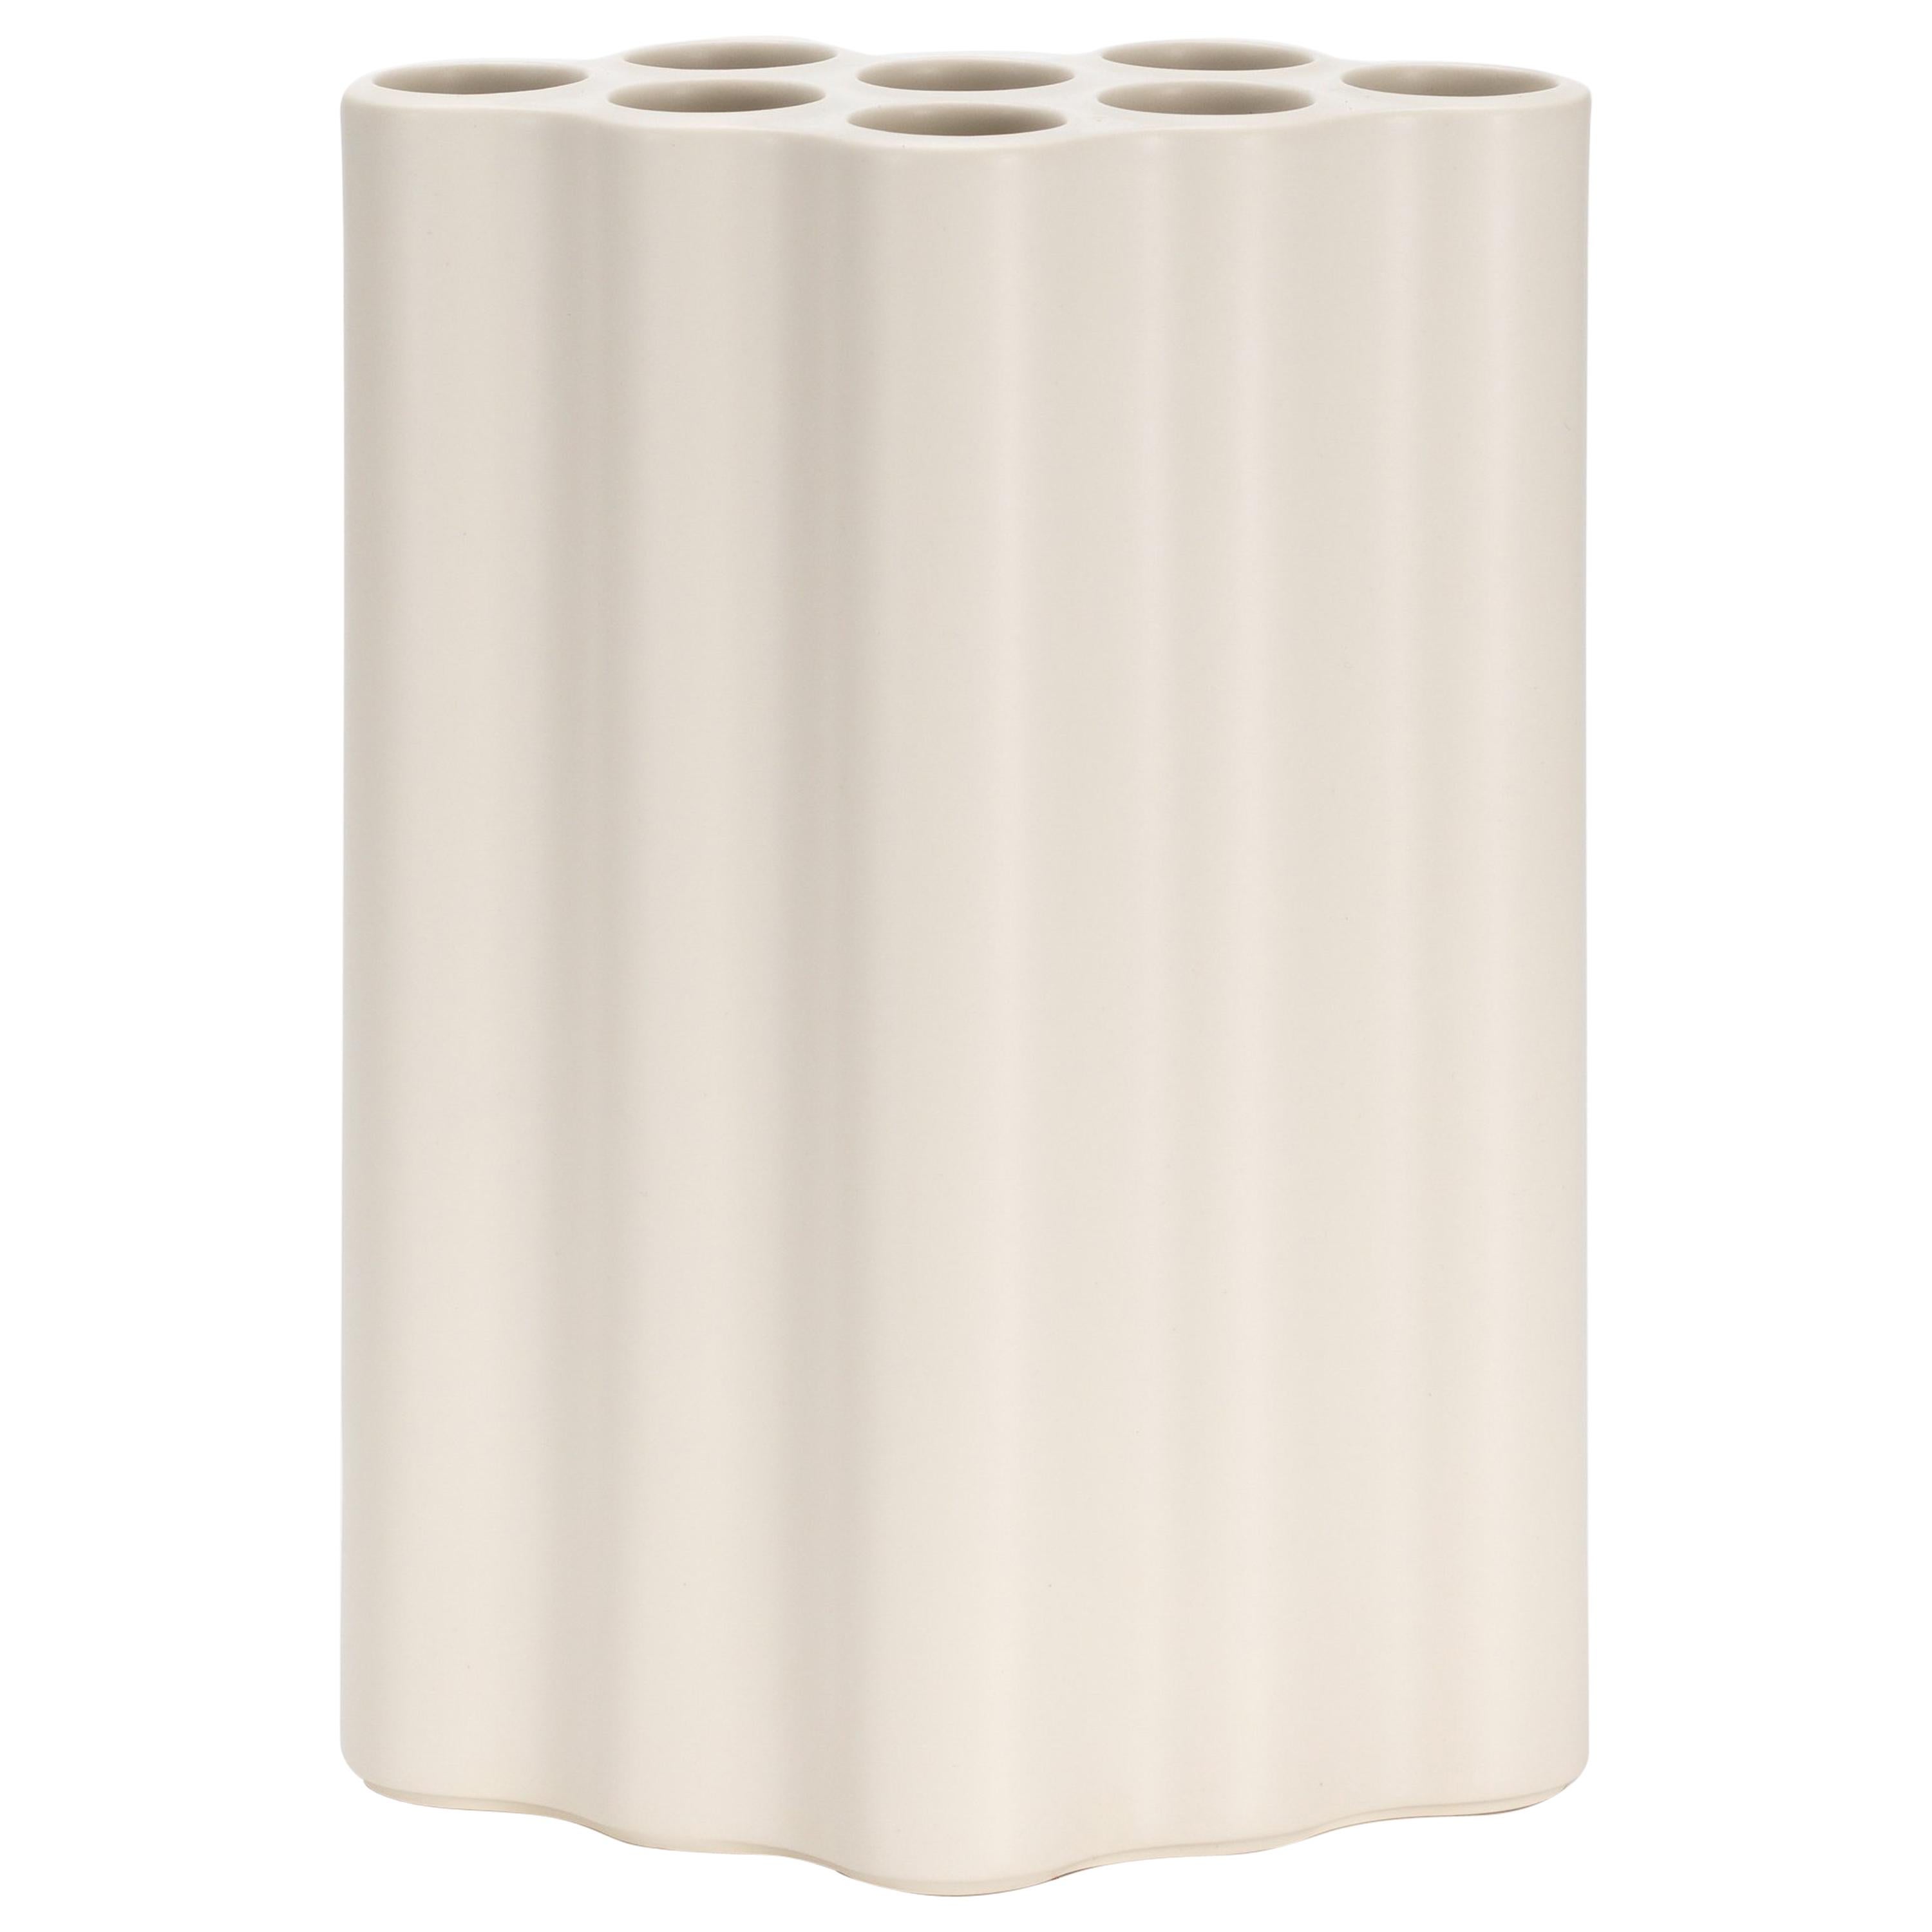 Vitra Large Nuage Céramique Vase in White by Ronan & Erwan Bouroullec For Sale